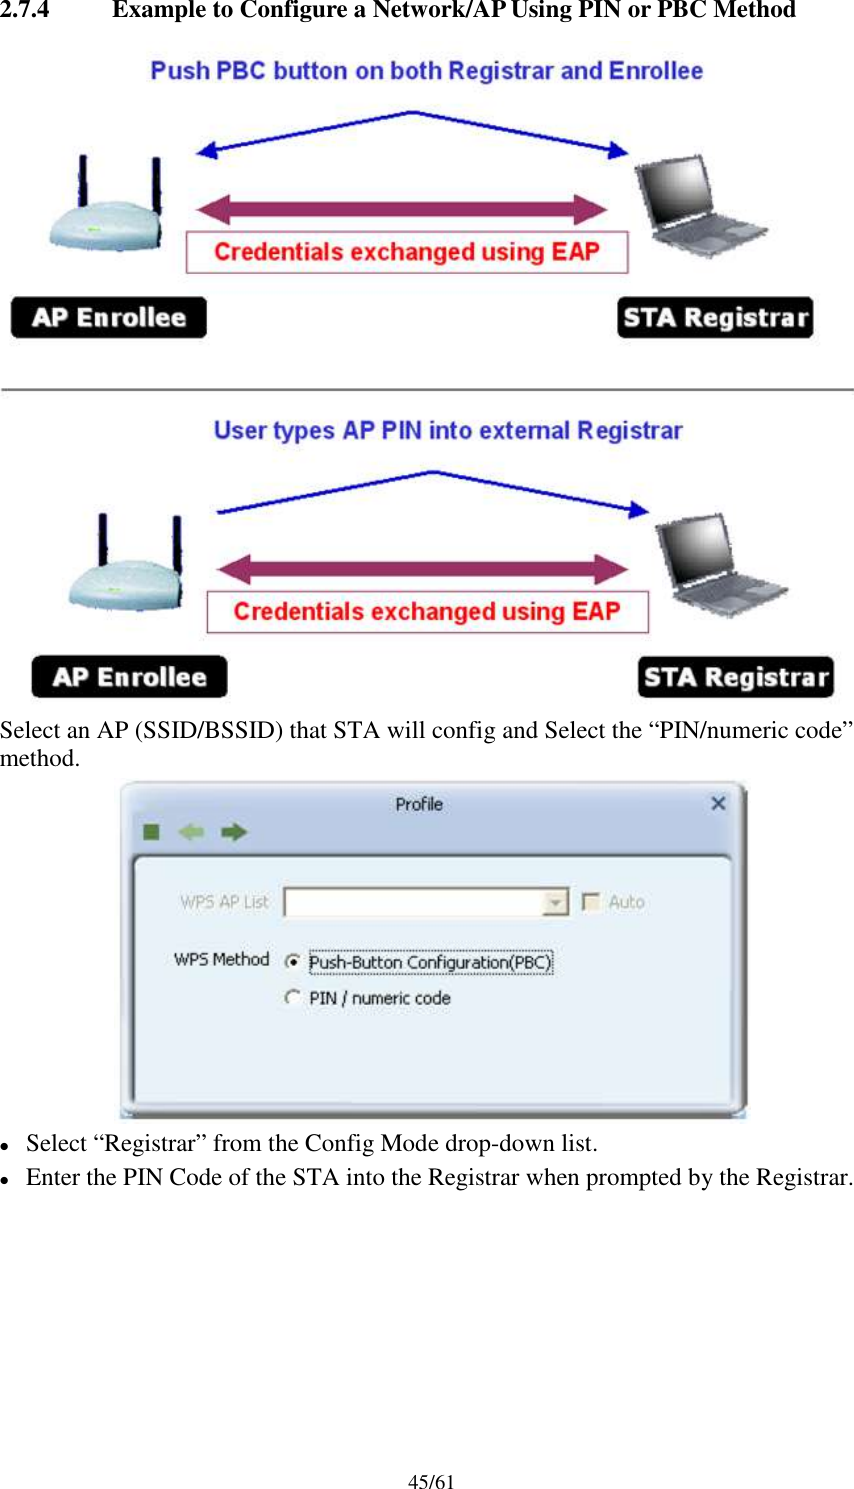 45/612.7.4 Example to Configure a Network/AP Using PIN or PBC MethodSelect an AP (SSID/BSSID) that STA will config and Select the “PIN/numeric code”method.Select “Registrar” from the Config Mode drop-down list.Enter the PIN Code of the STA into the Registrar when prompted by the Registrar.